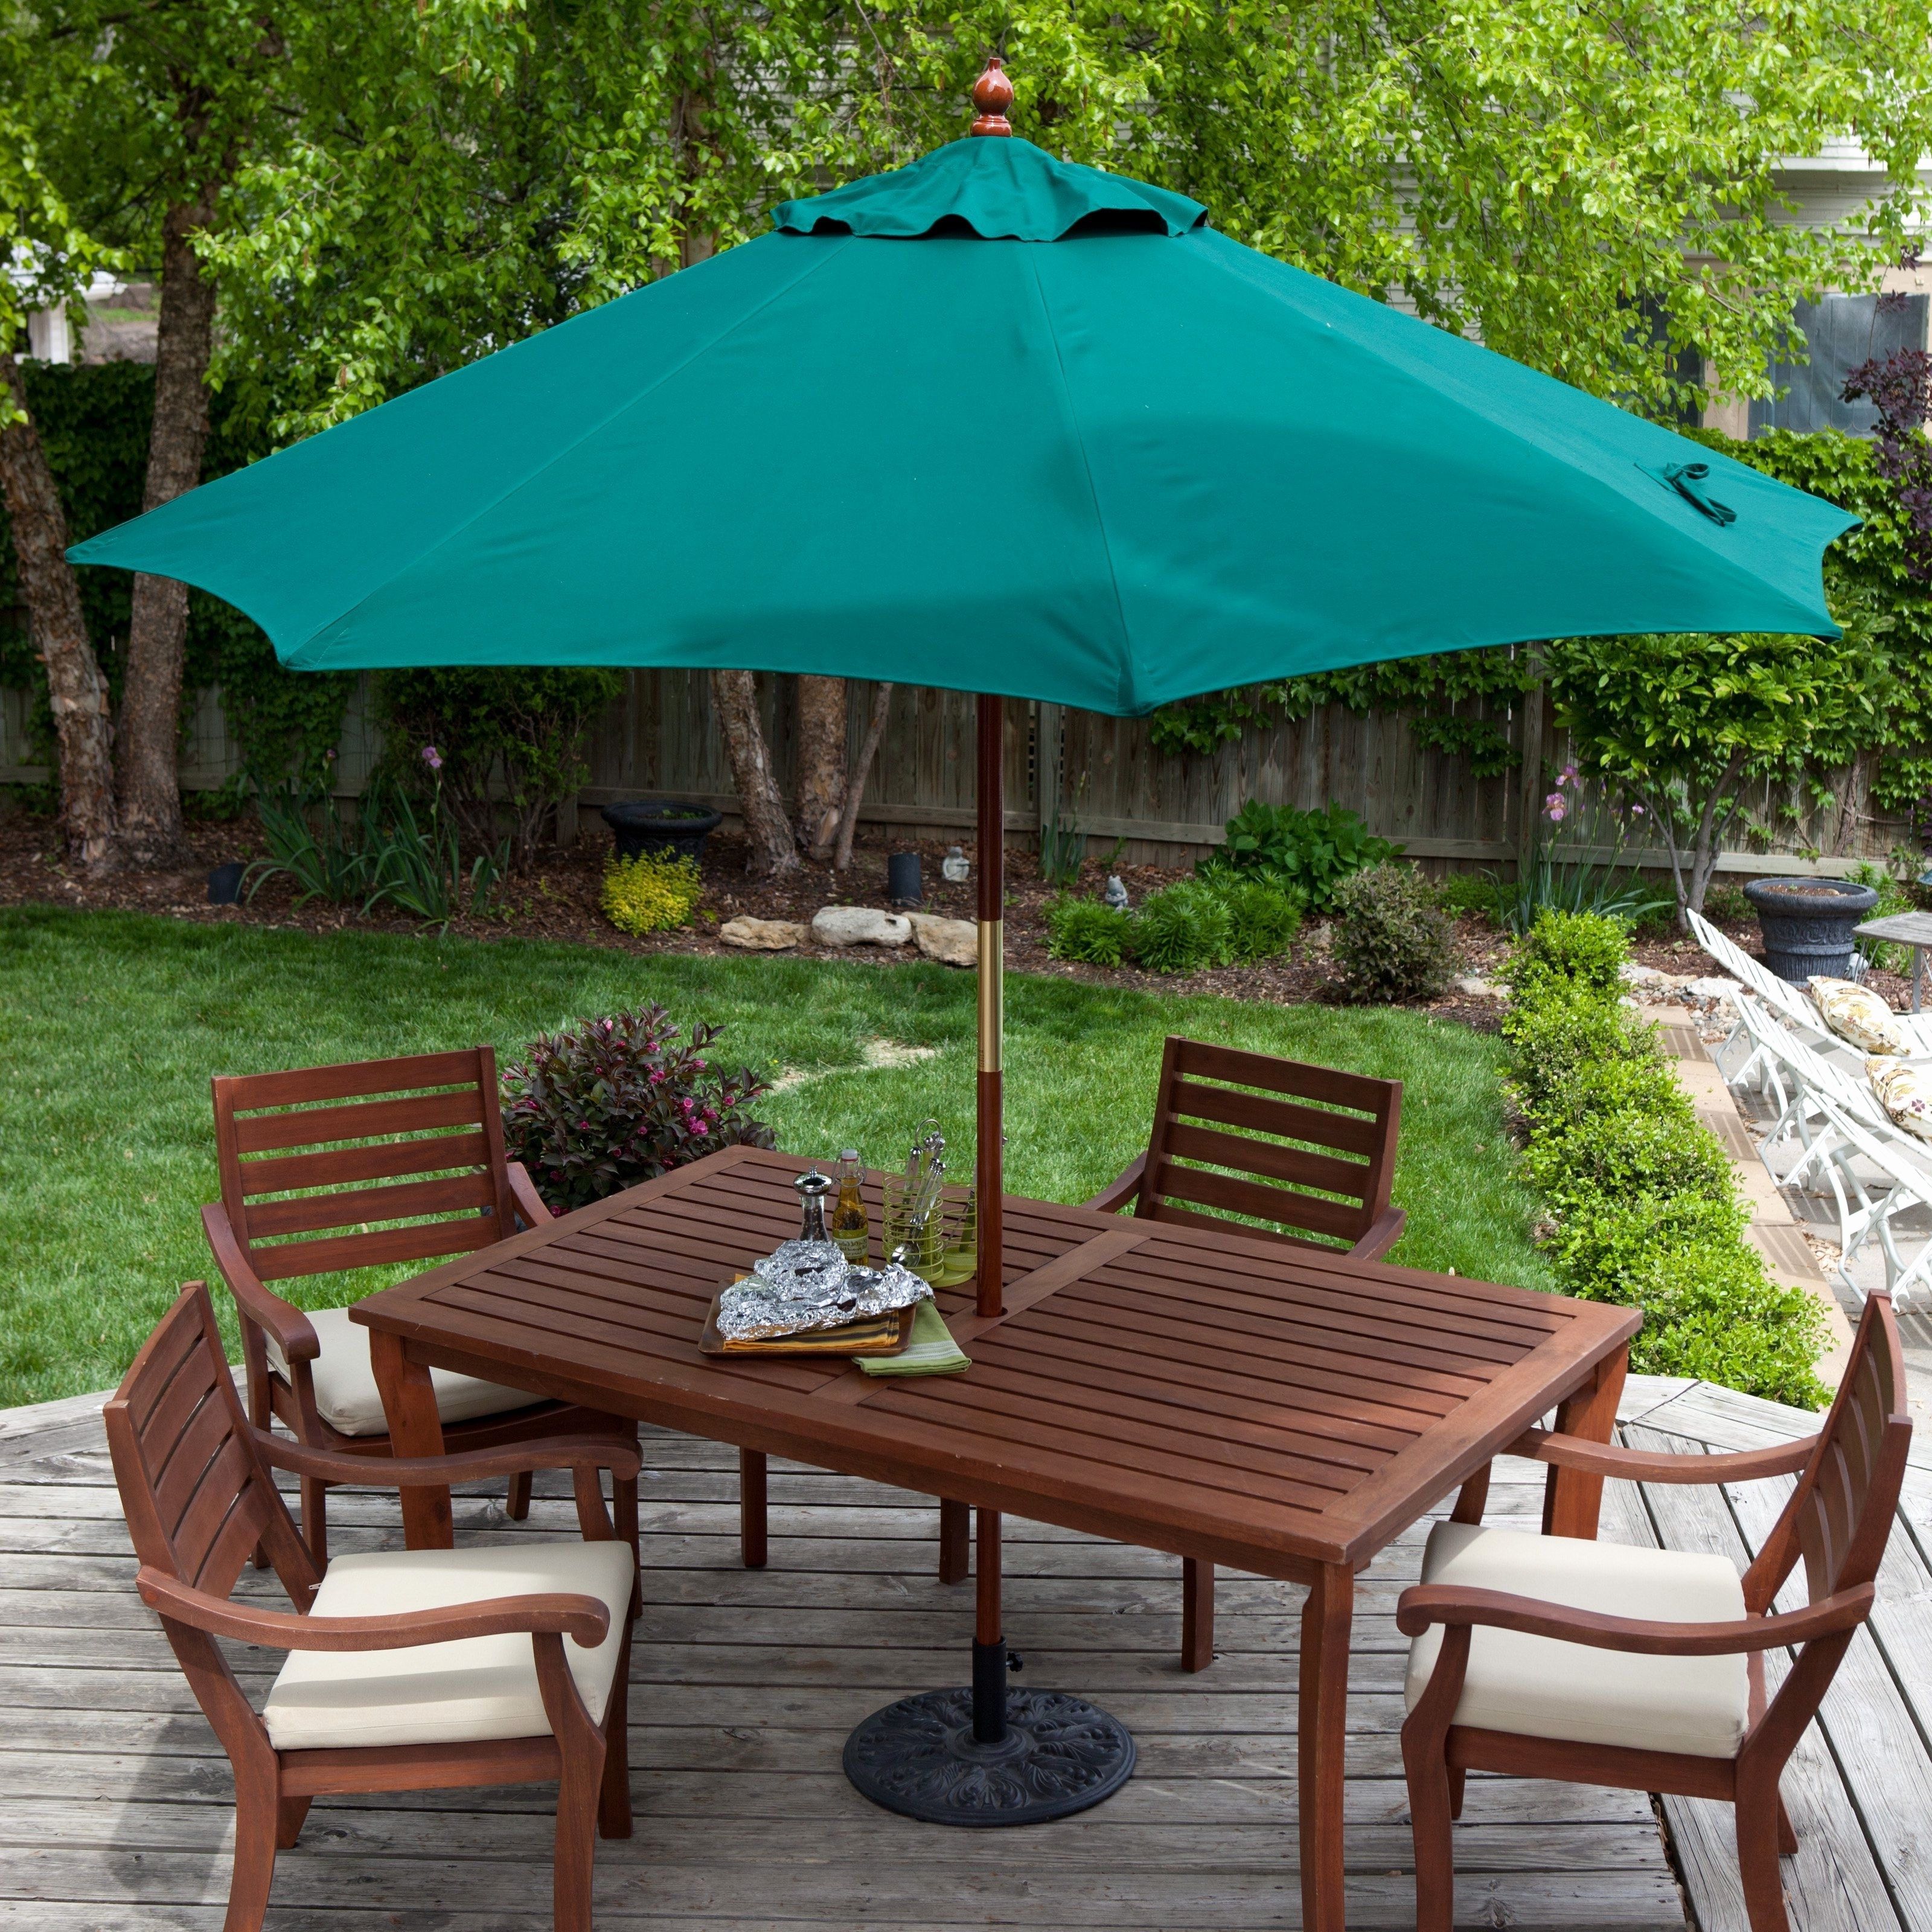 Umbrella For Outdoor Table Amazing Patio Chair With 6 Random 2 Regarding Newest Small Patio Tables With Umbrellas (View 12 of 20)